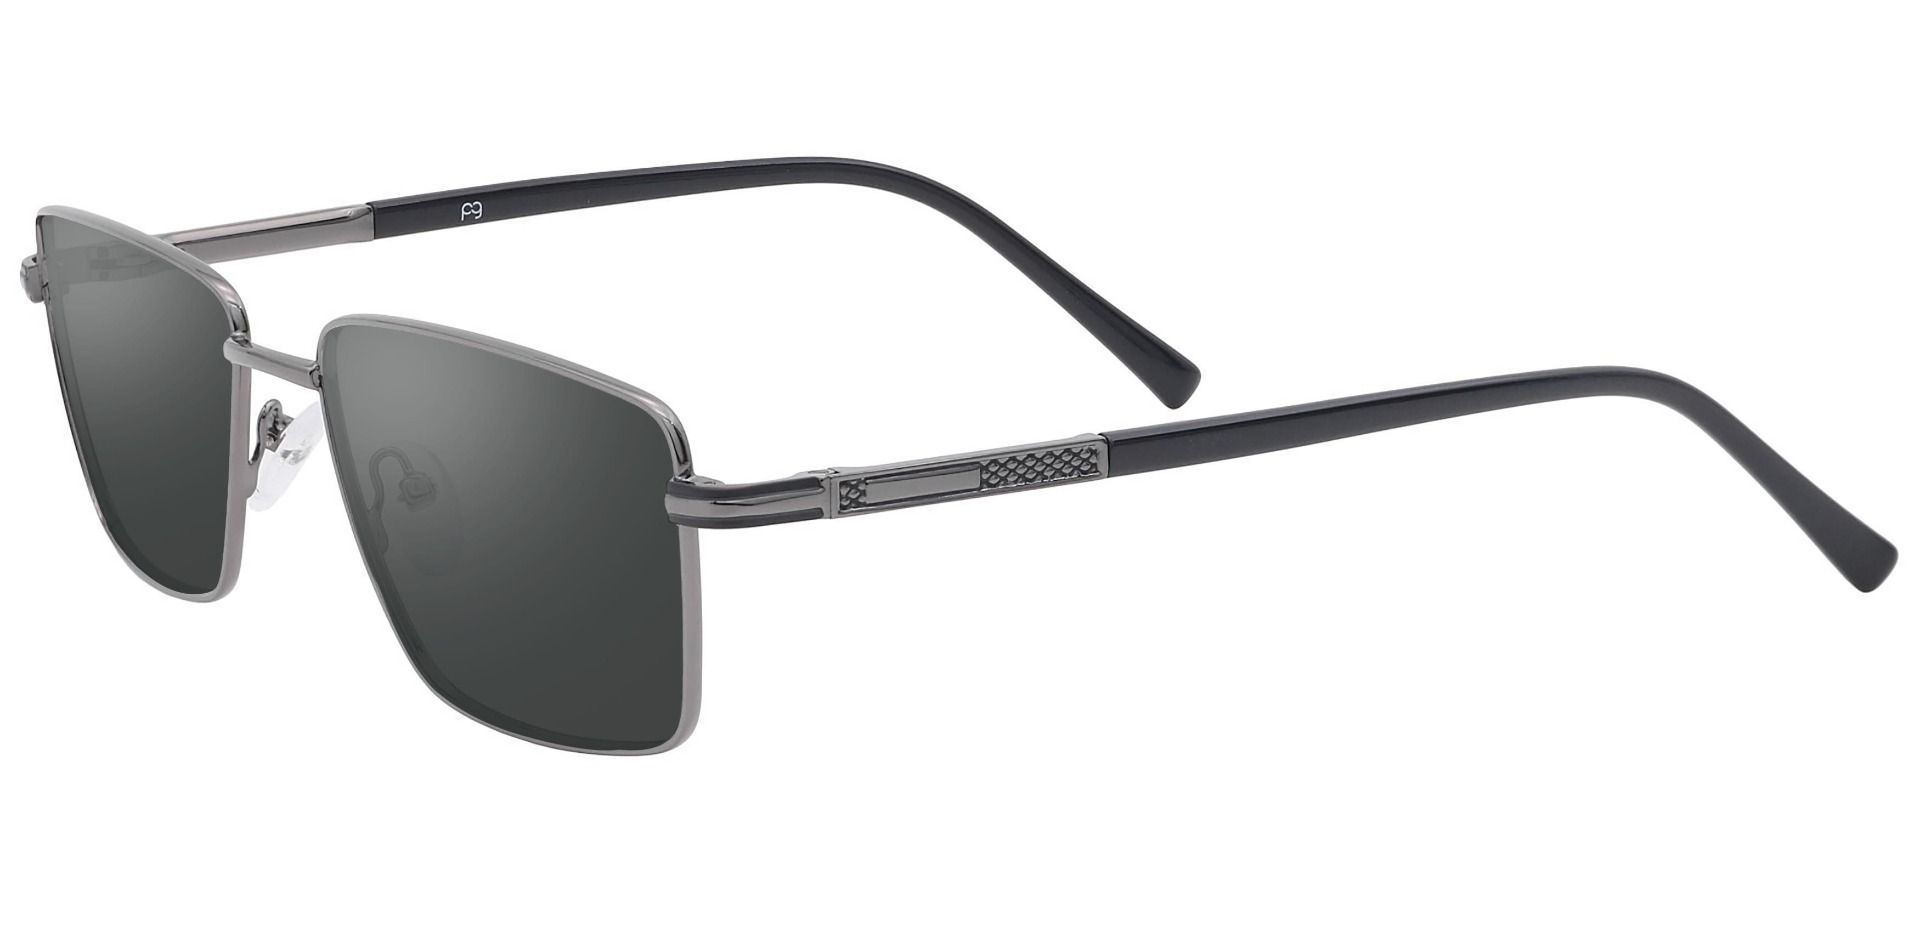 Daniel Rectangle Lined Bifocal Sunglasses - Gray Frame With Gray Lenses